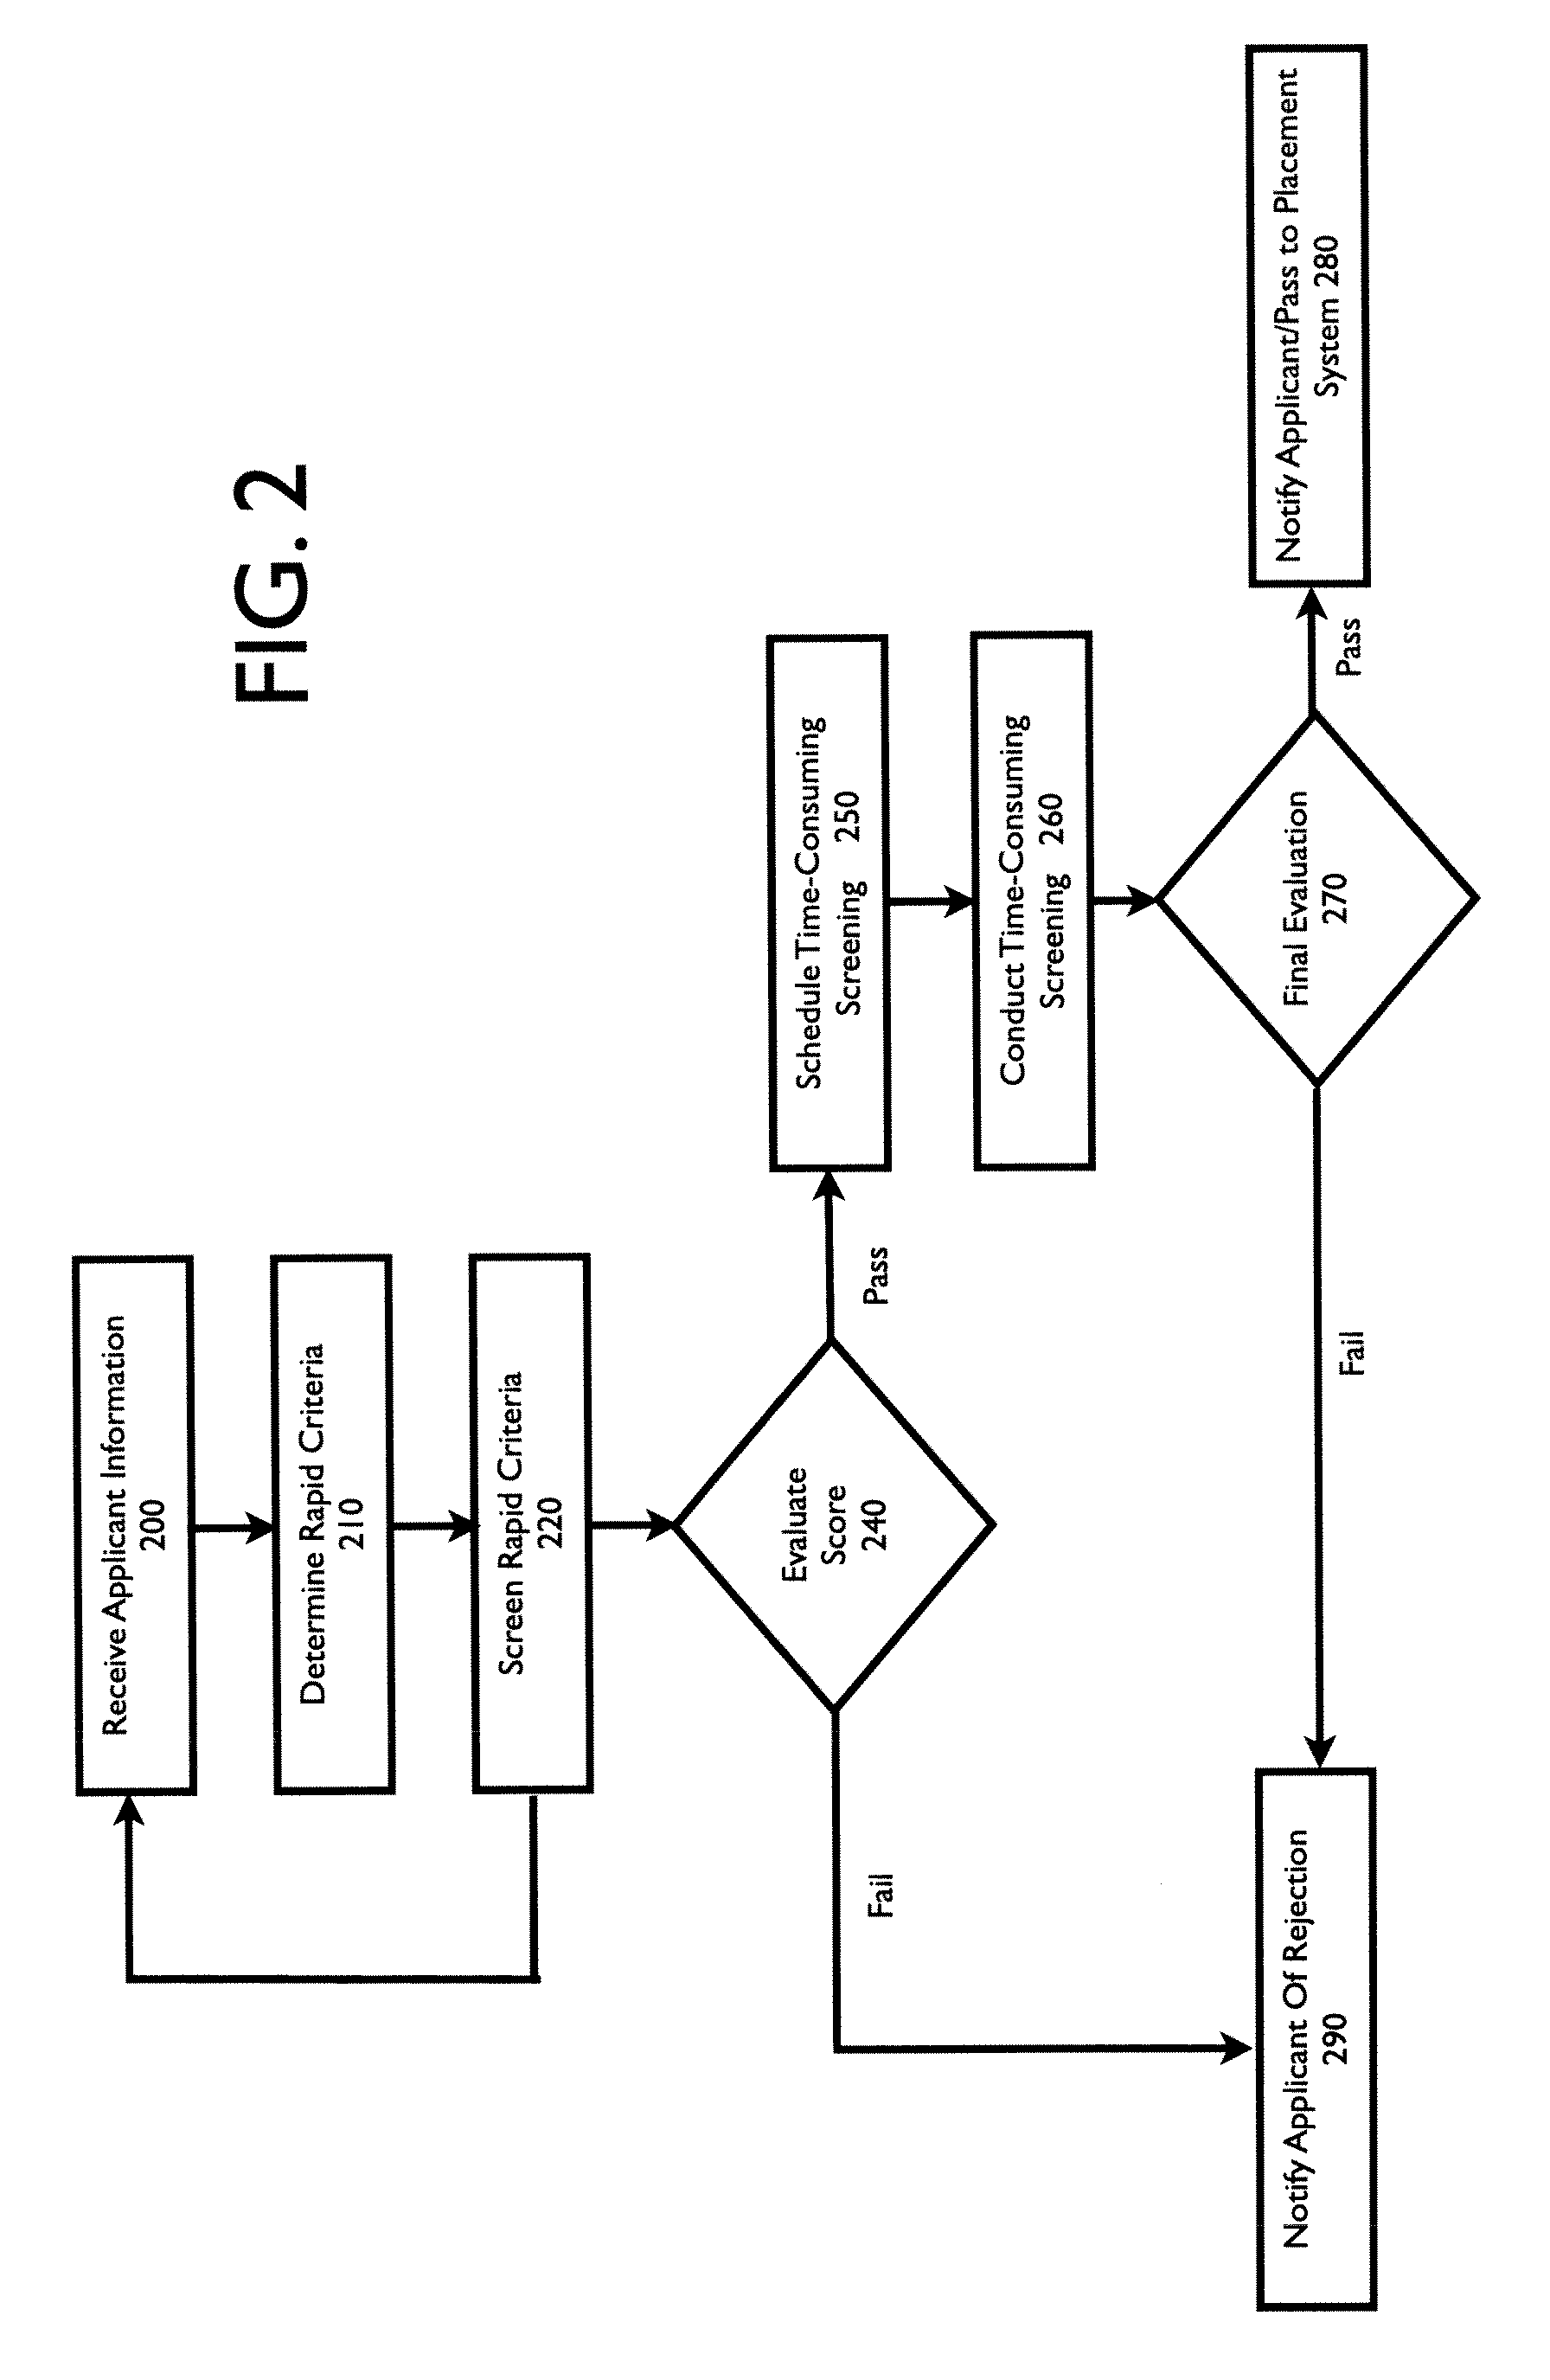 System and method for screening and processing applicants